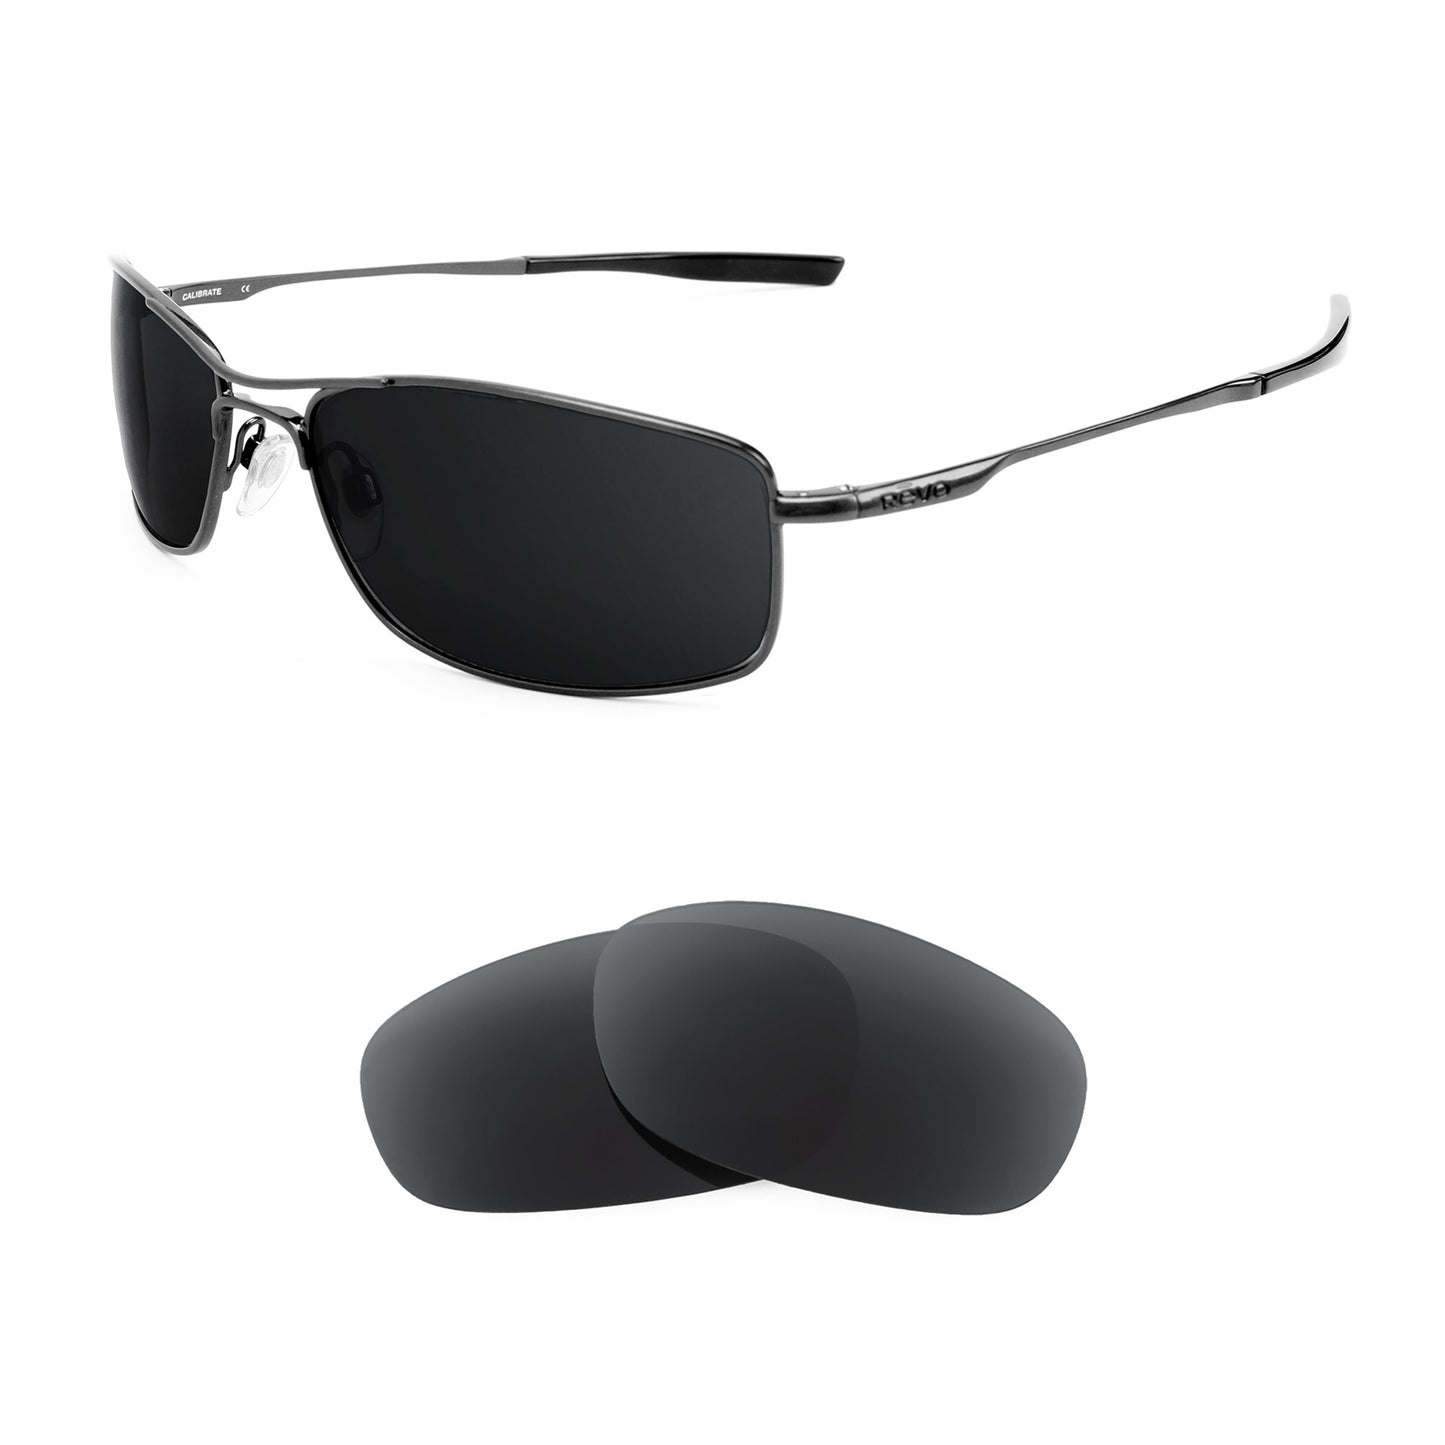 Revo Calibrate RE9015 sunglasses with replacement lenses